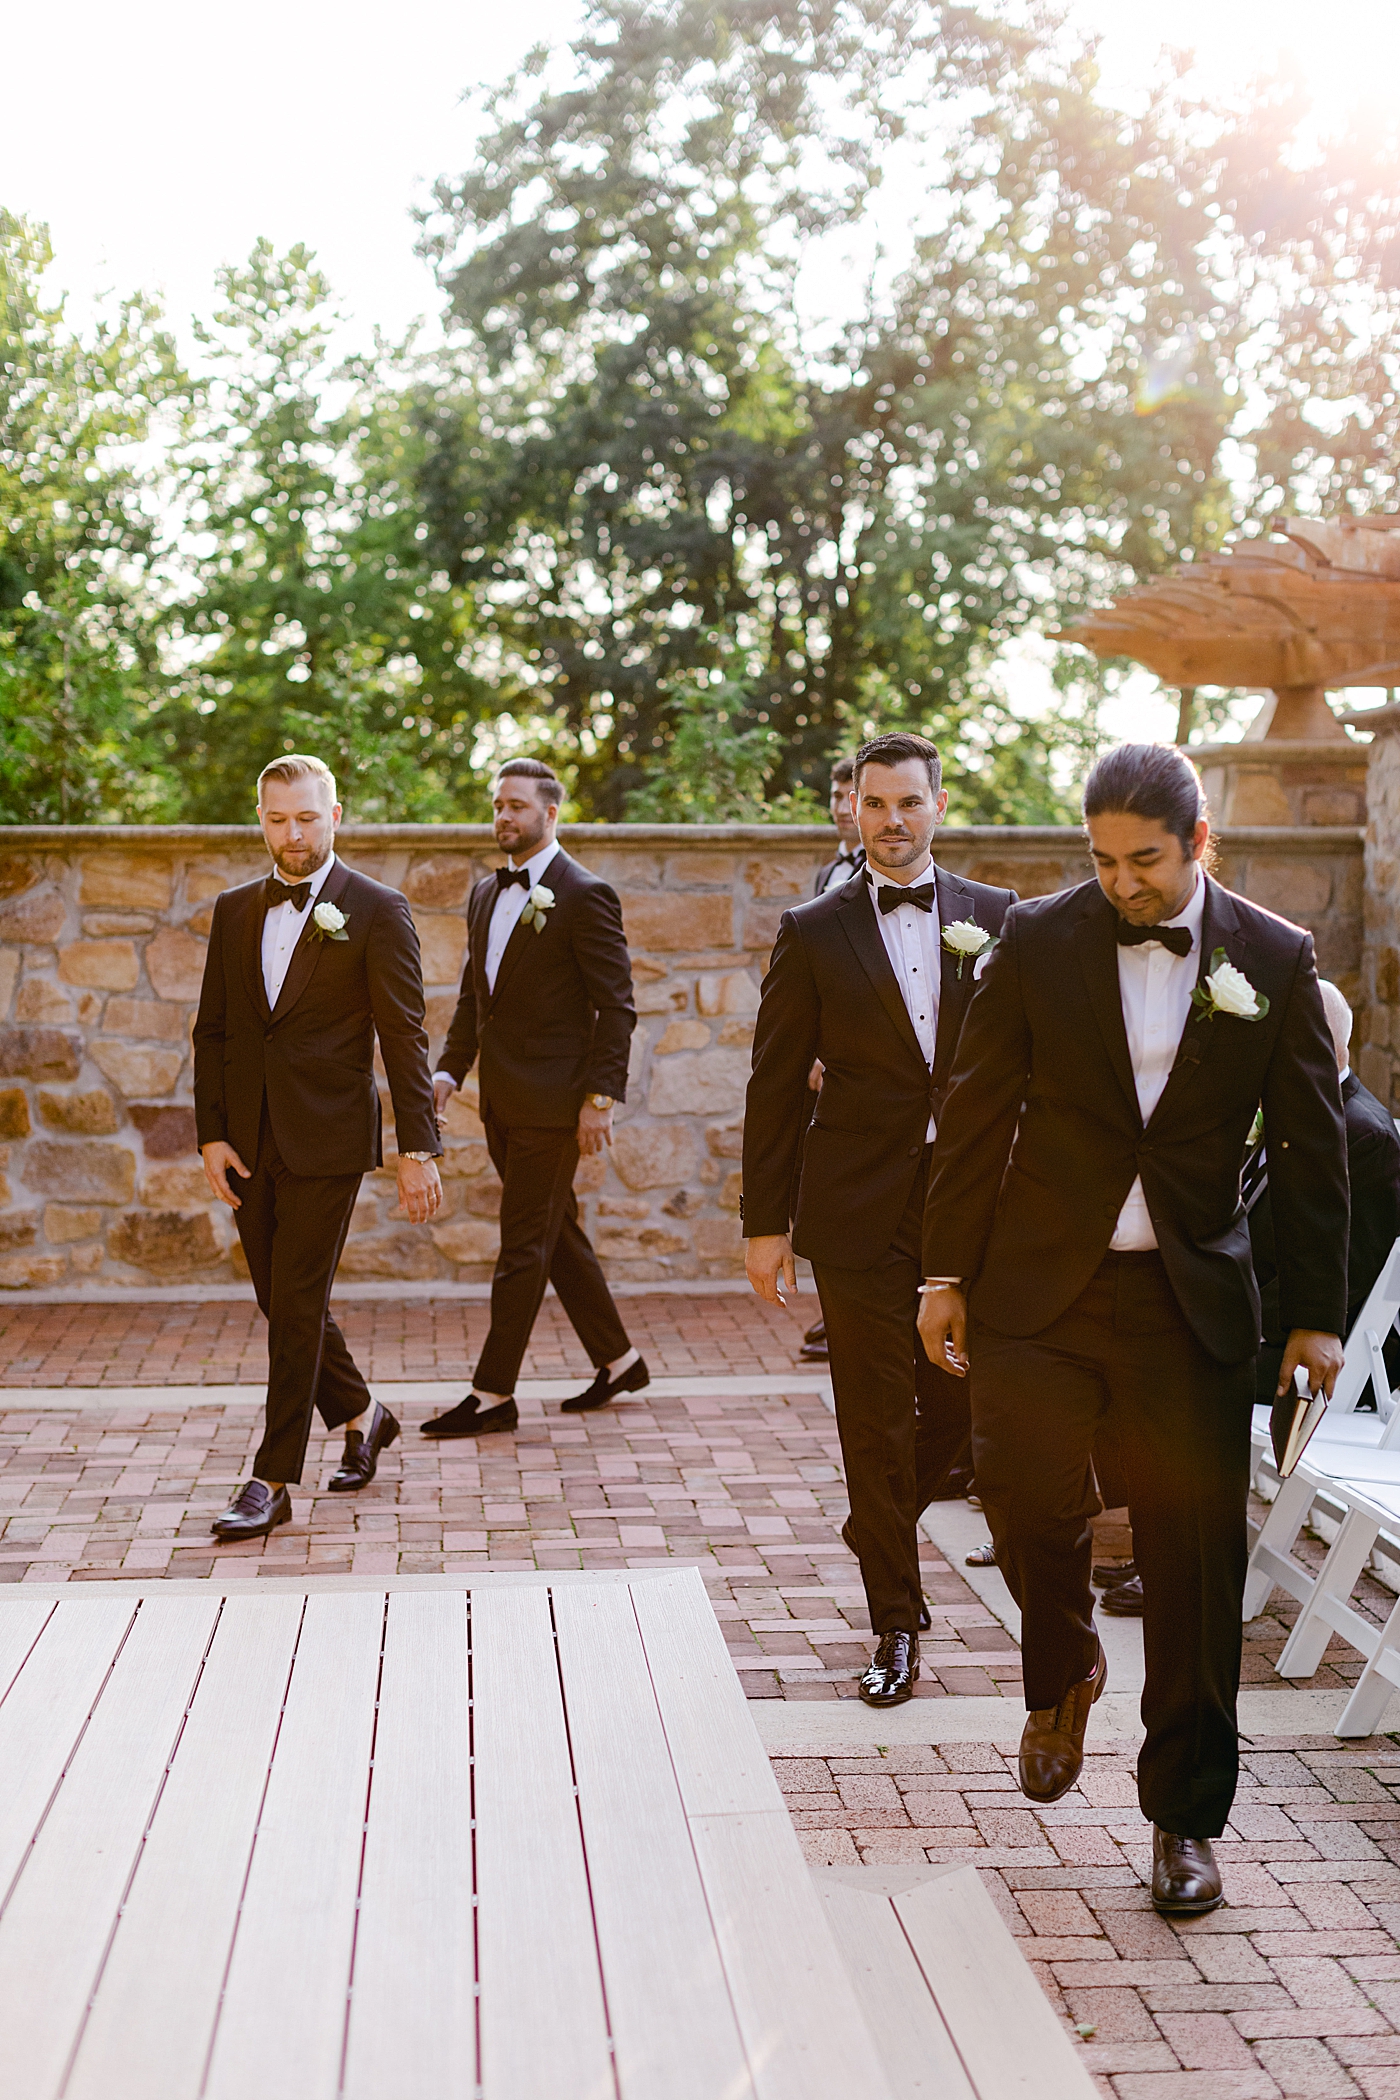 Groomsmen walking to the ceremony location | Image by Hope Helmuth Photography